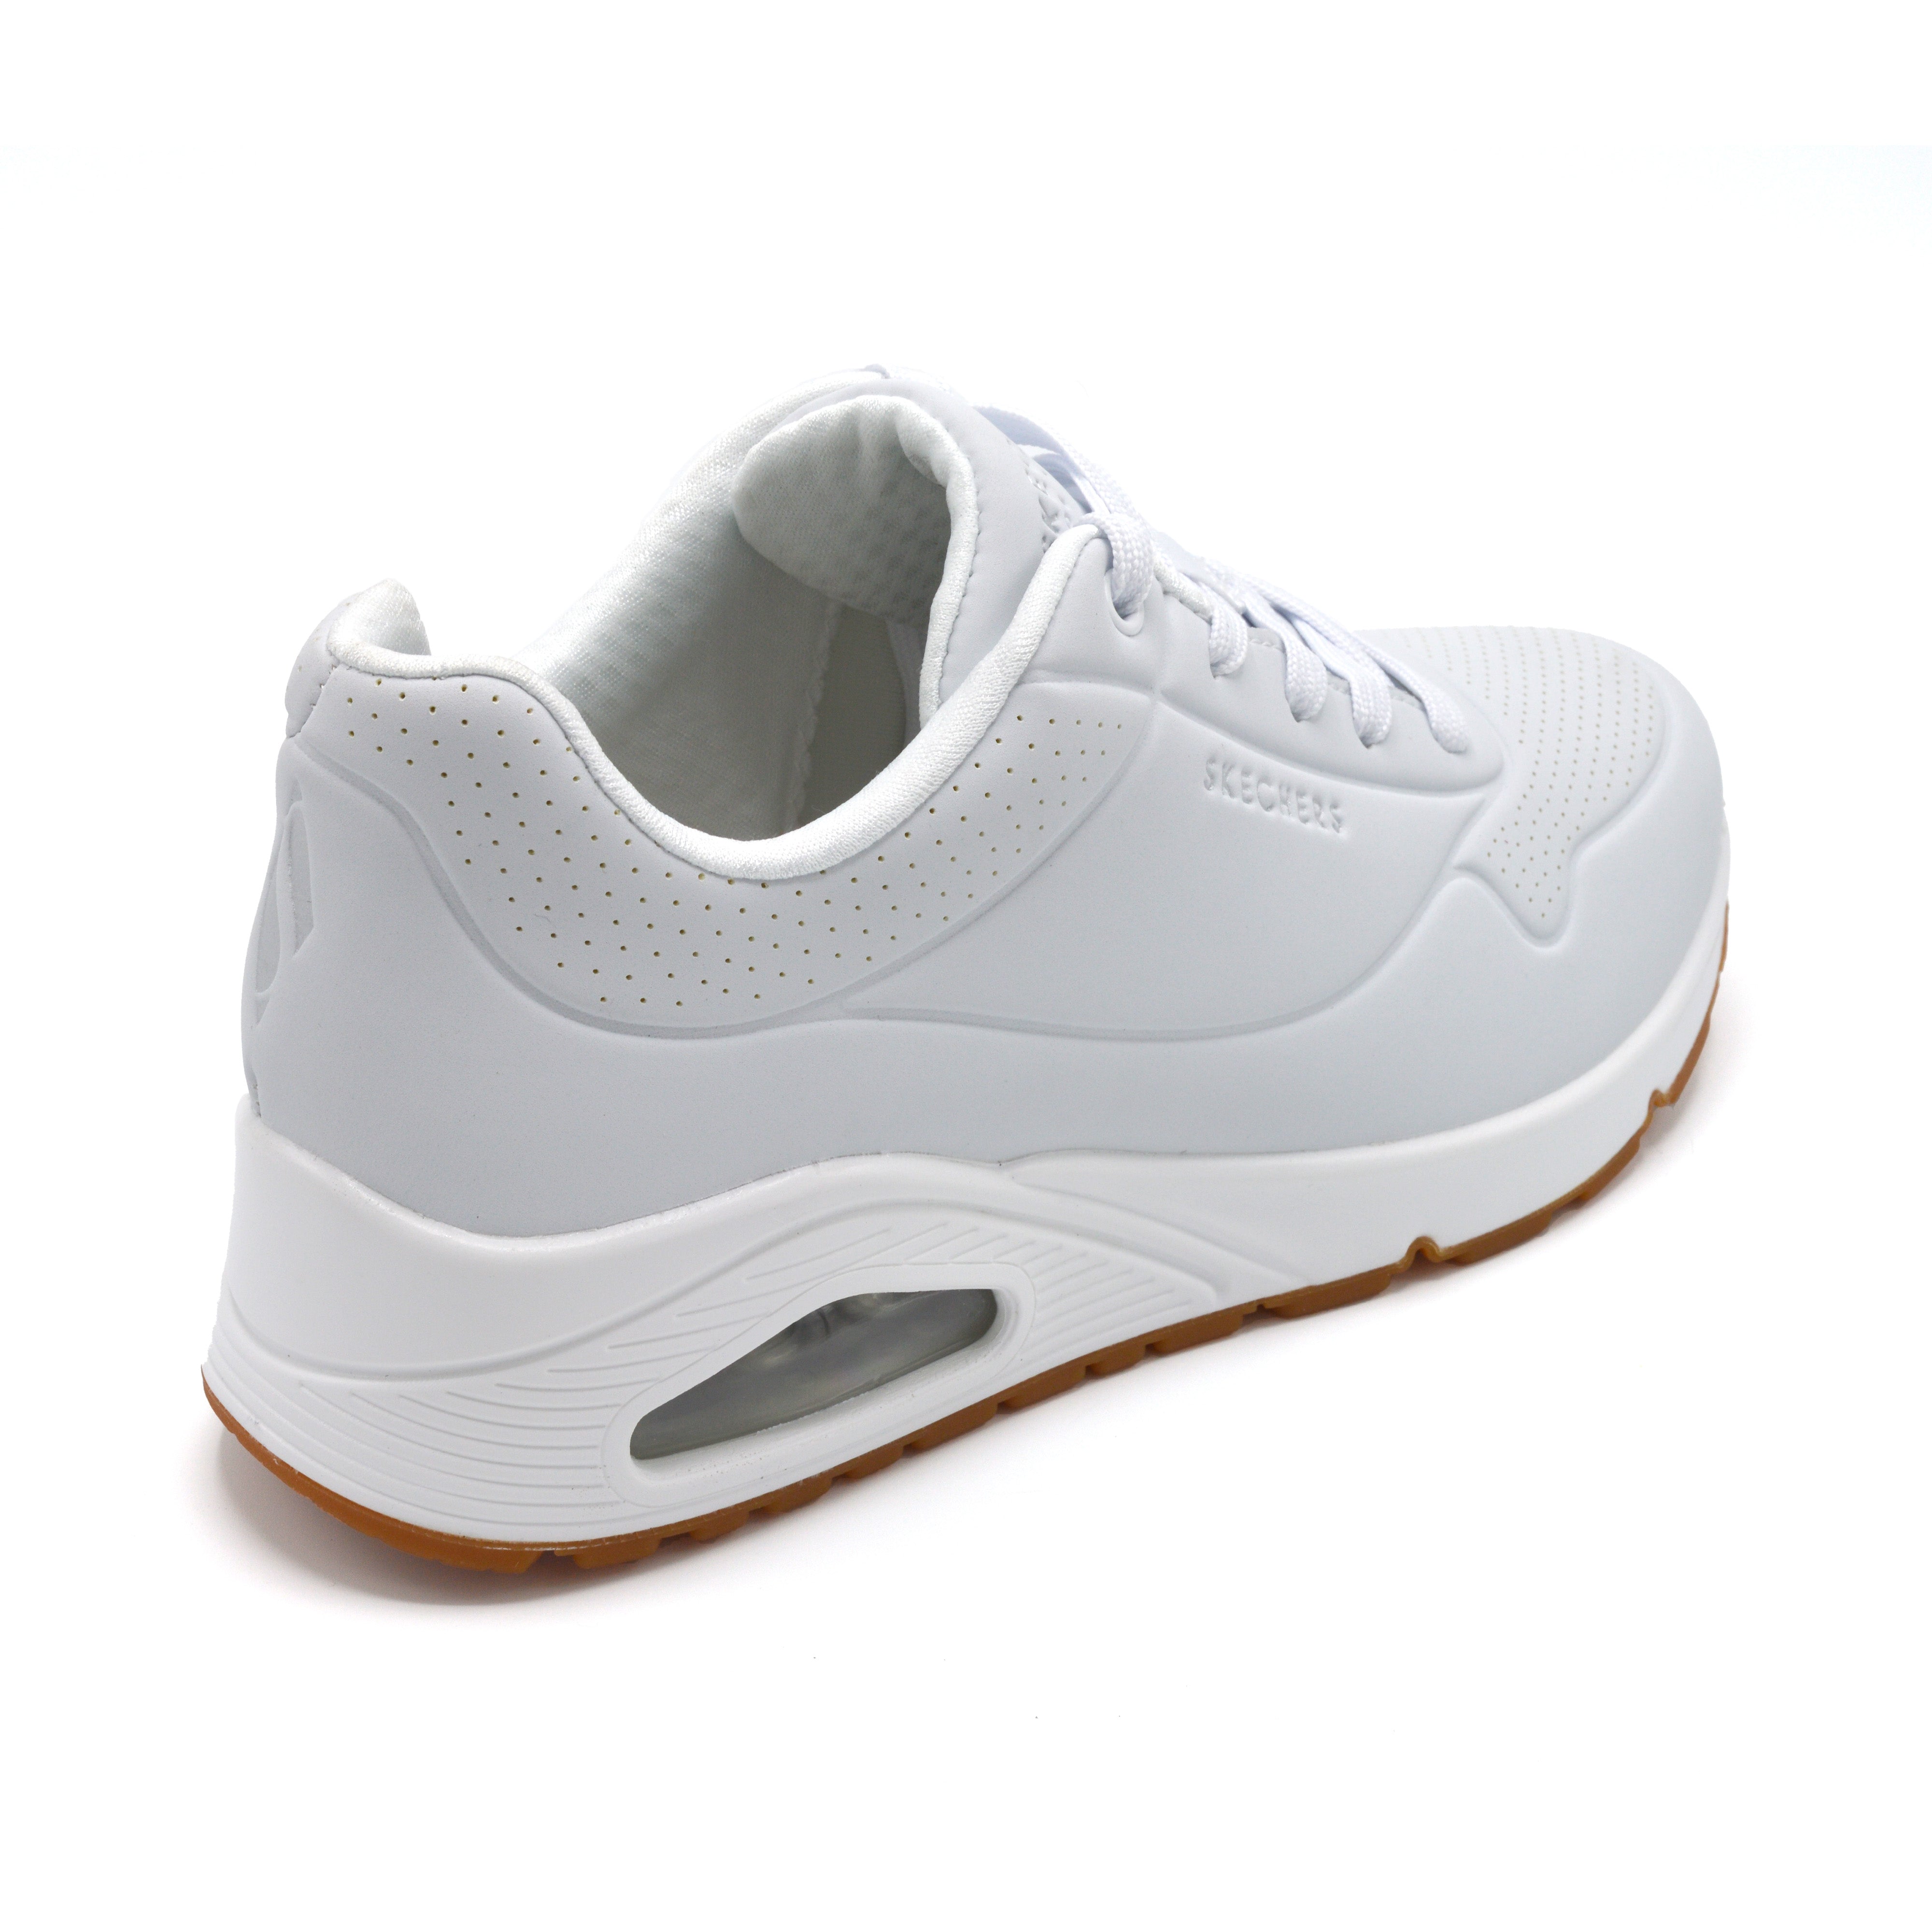 Skechers Uno Stand On Air - Ladies Wide Fit Summer Trainer - 2E Fitting - White